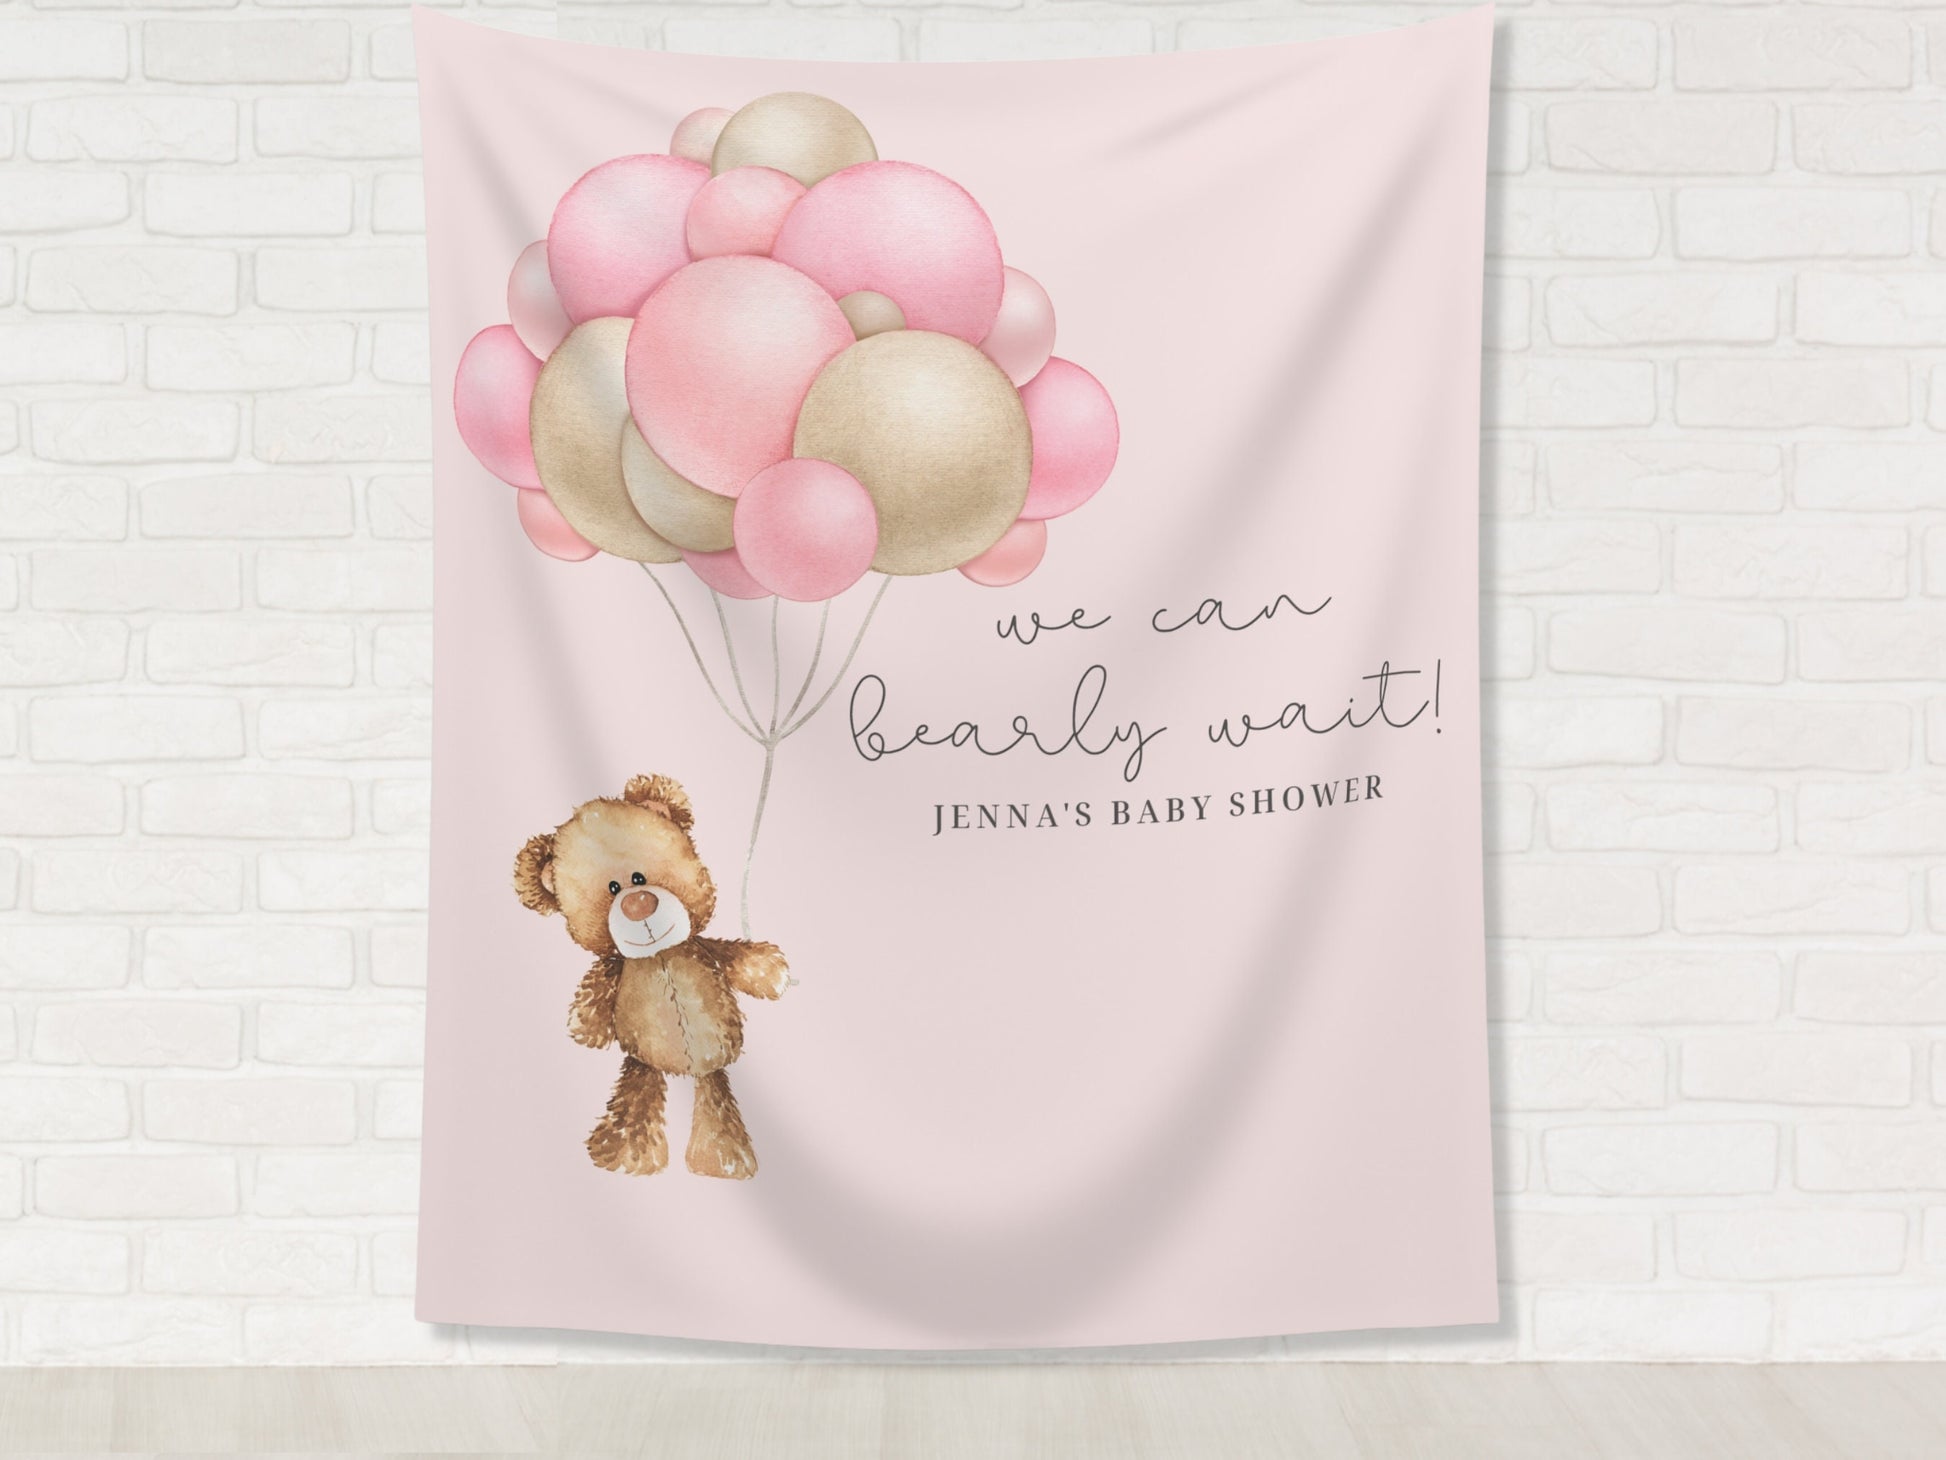 Teddy Bear Personalized Baby Shower Backdrop | We Can Bearly Wait Custom Party Banner and Welcome Sign Set